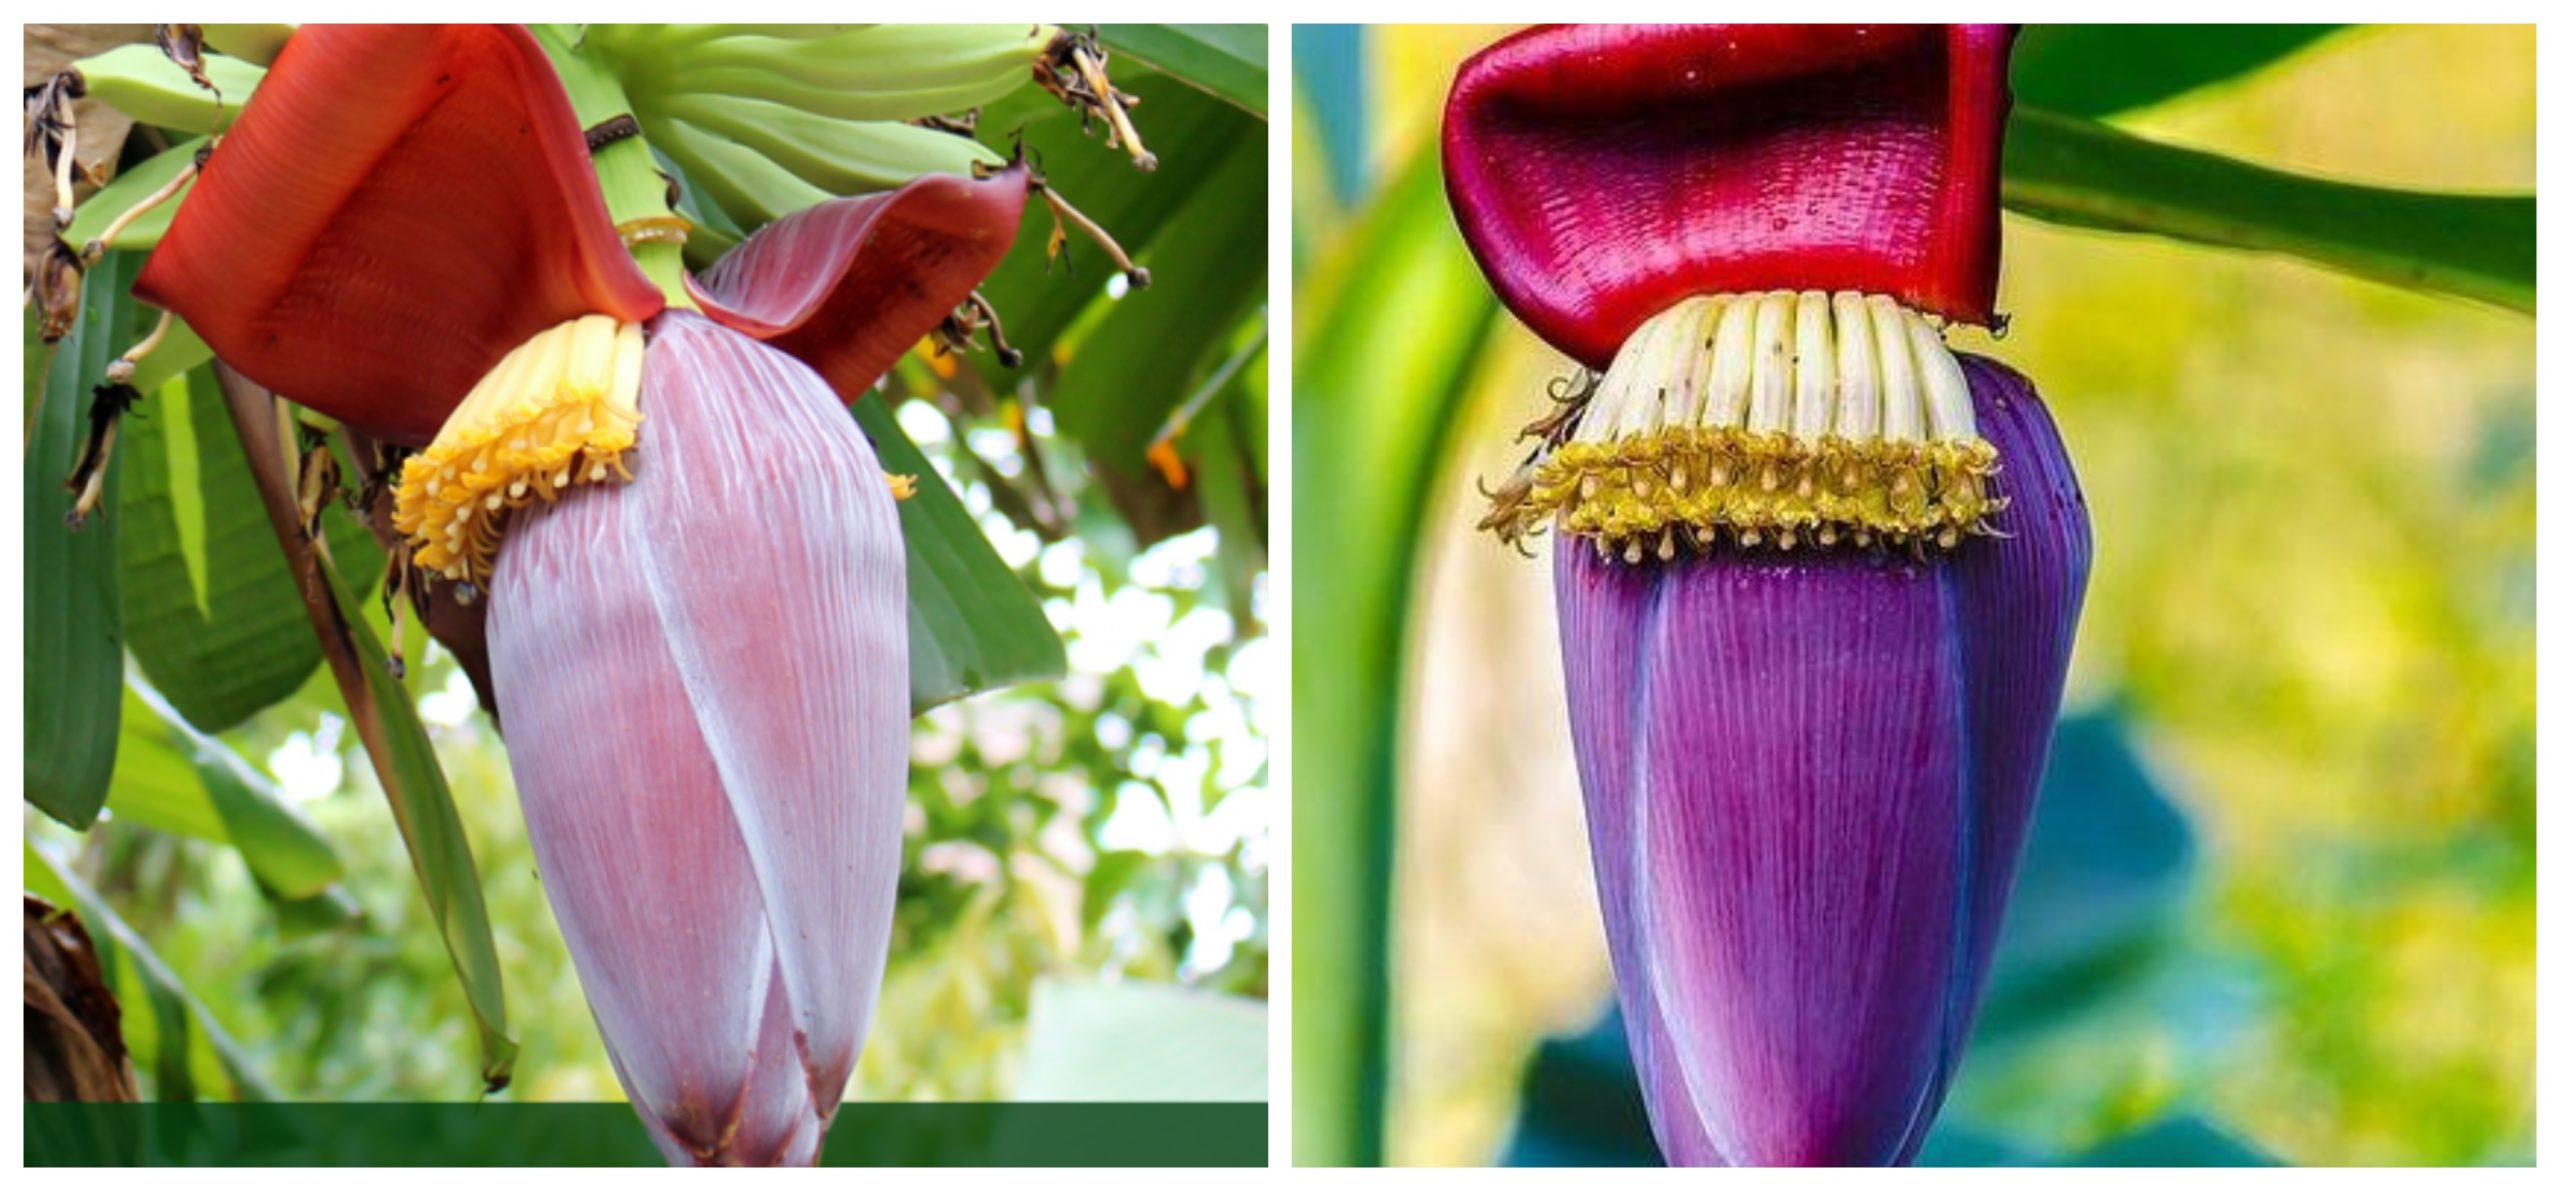 Did you know that the discarded Banana Blossom is a super food, and an expensive delicacy?